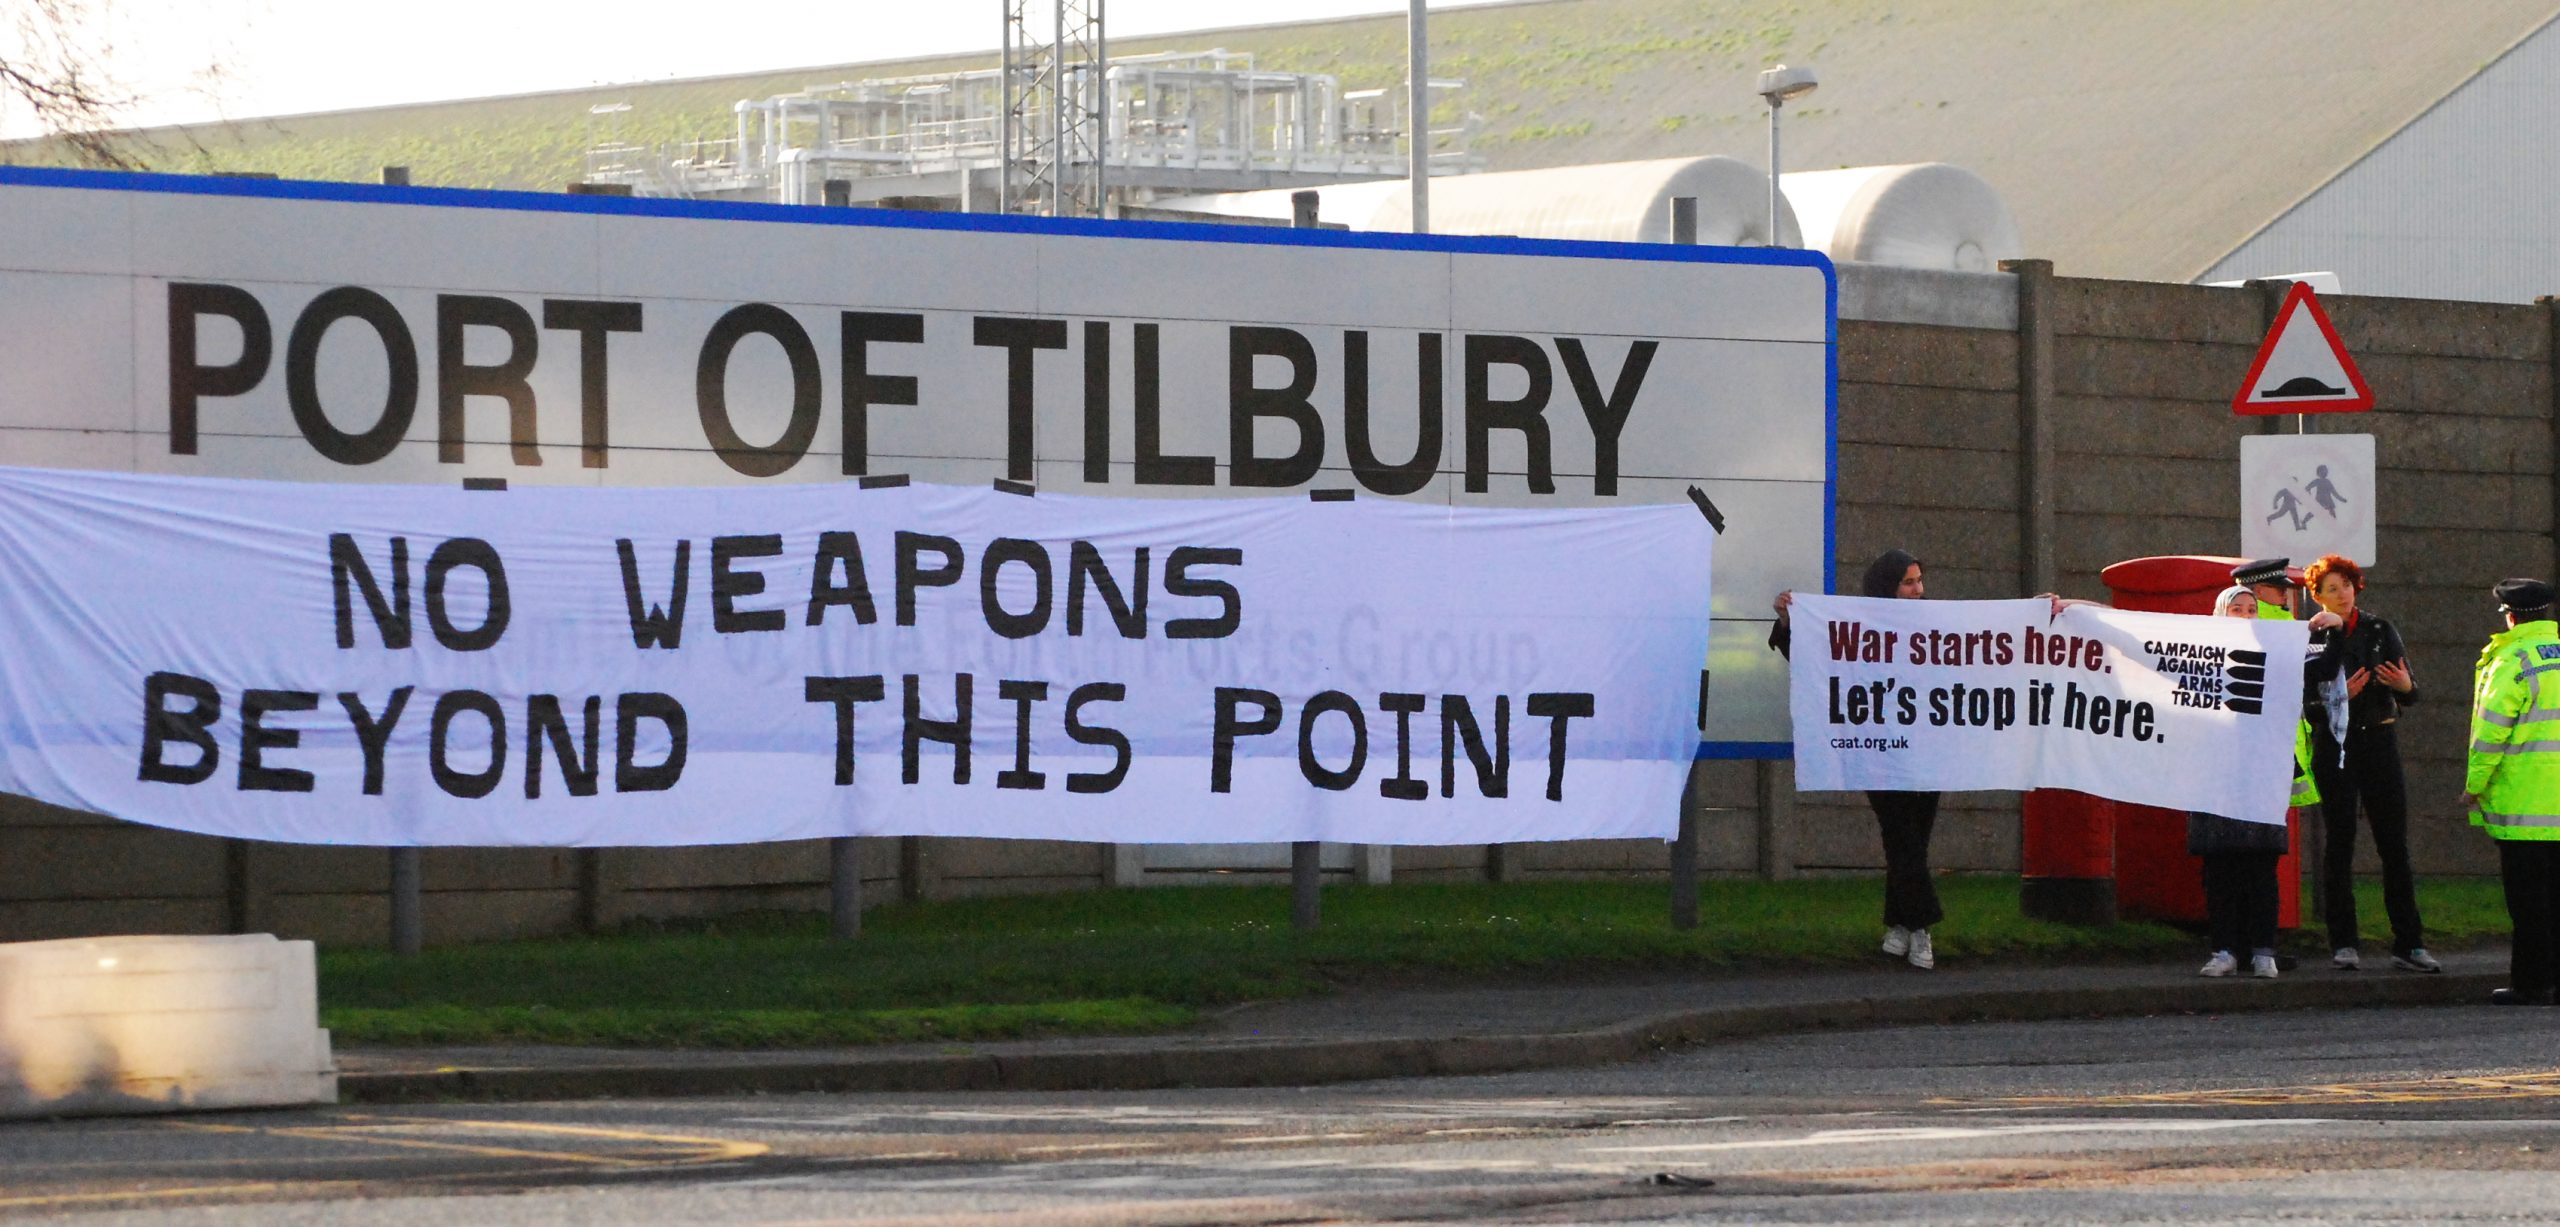 'no weapons beyond this point' banner hangs below Port of Tilbury sign